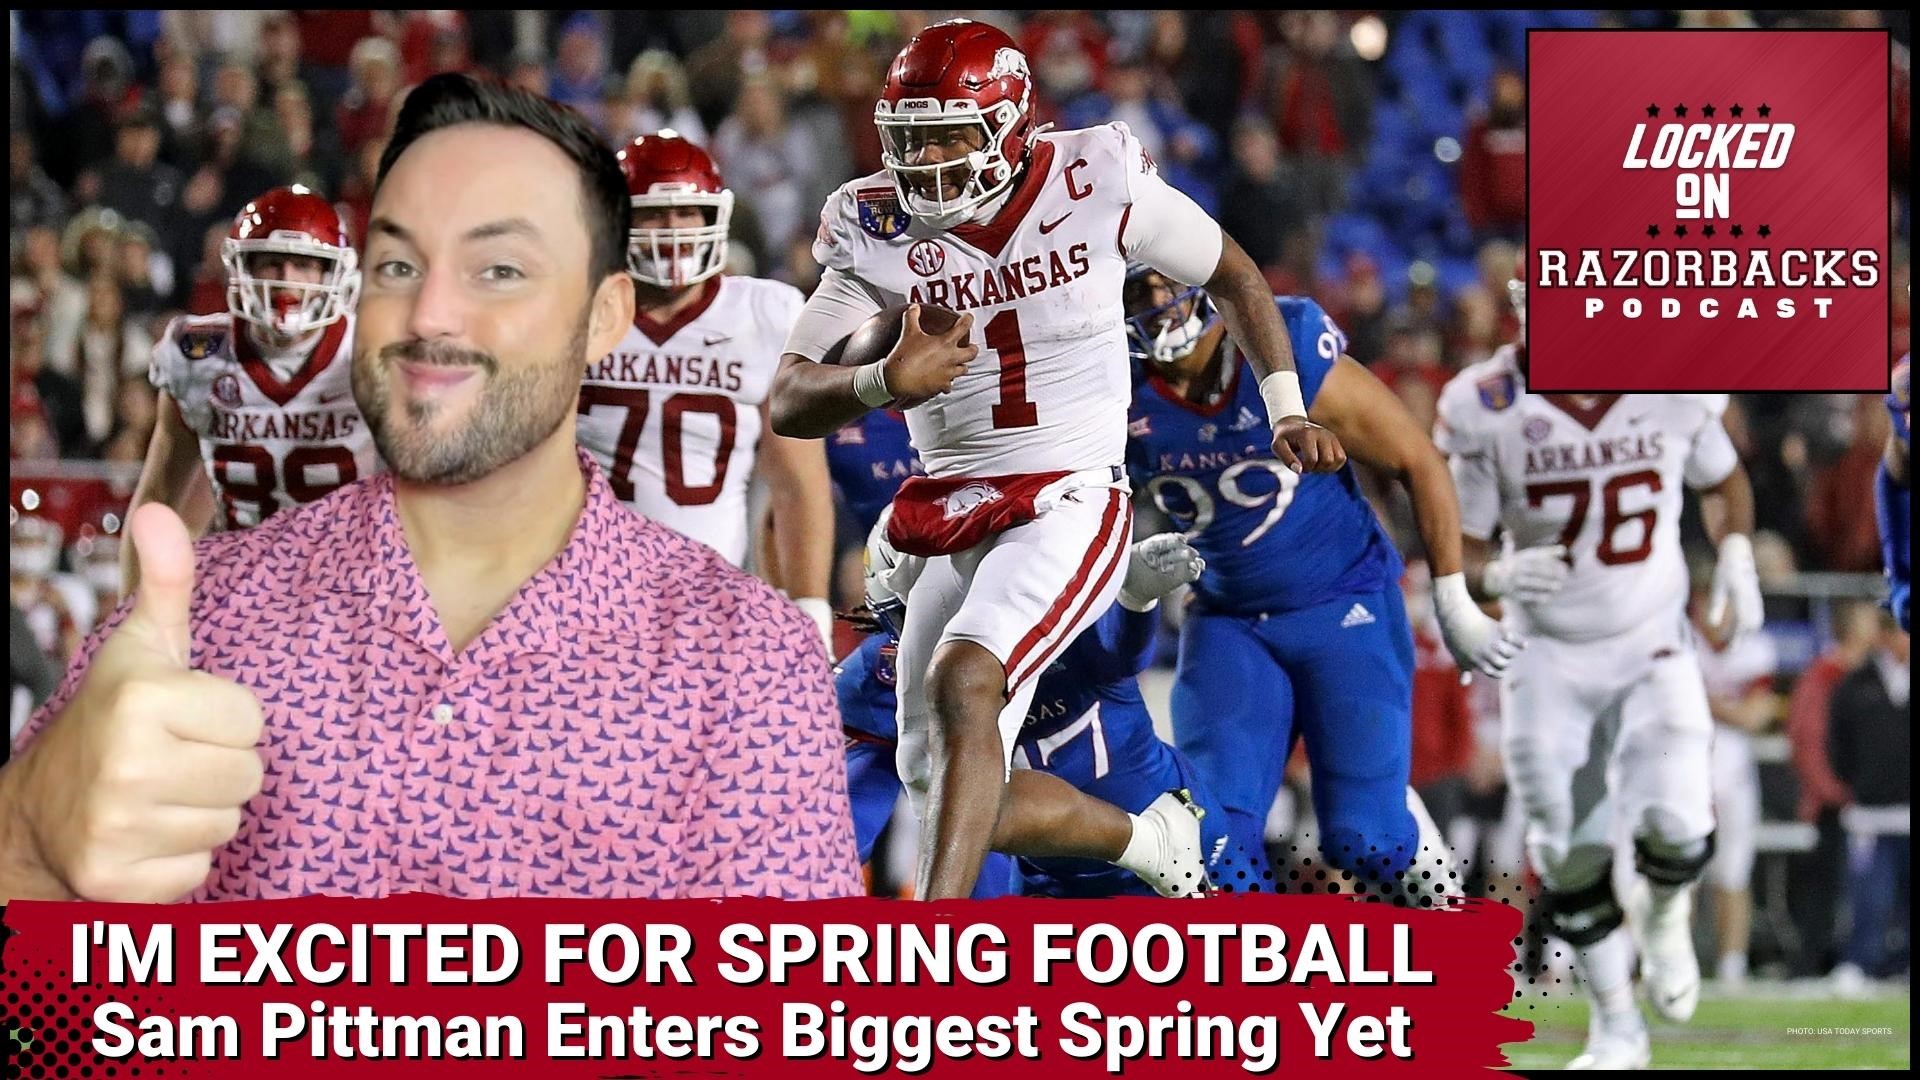 Razorback Football will begin spring practices in the next few weeks in Fayetteville, but many fans don't really care about what happens during the spring.